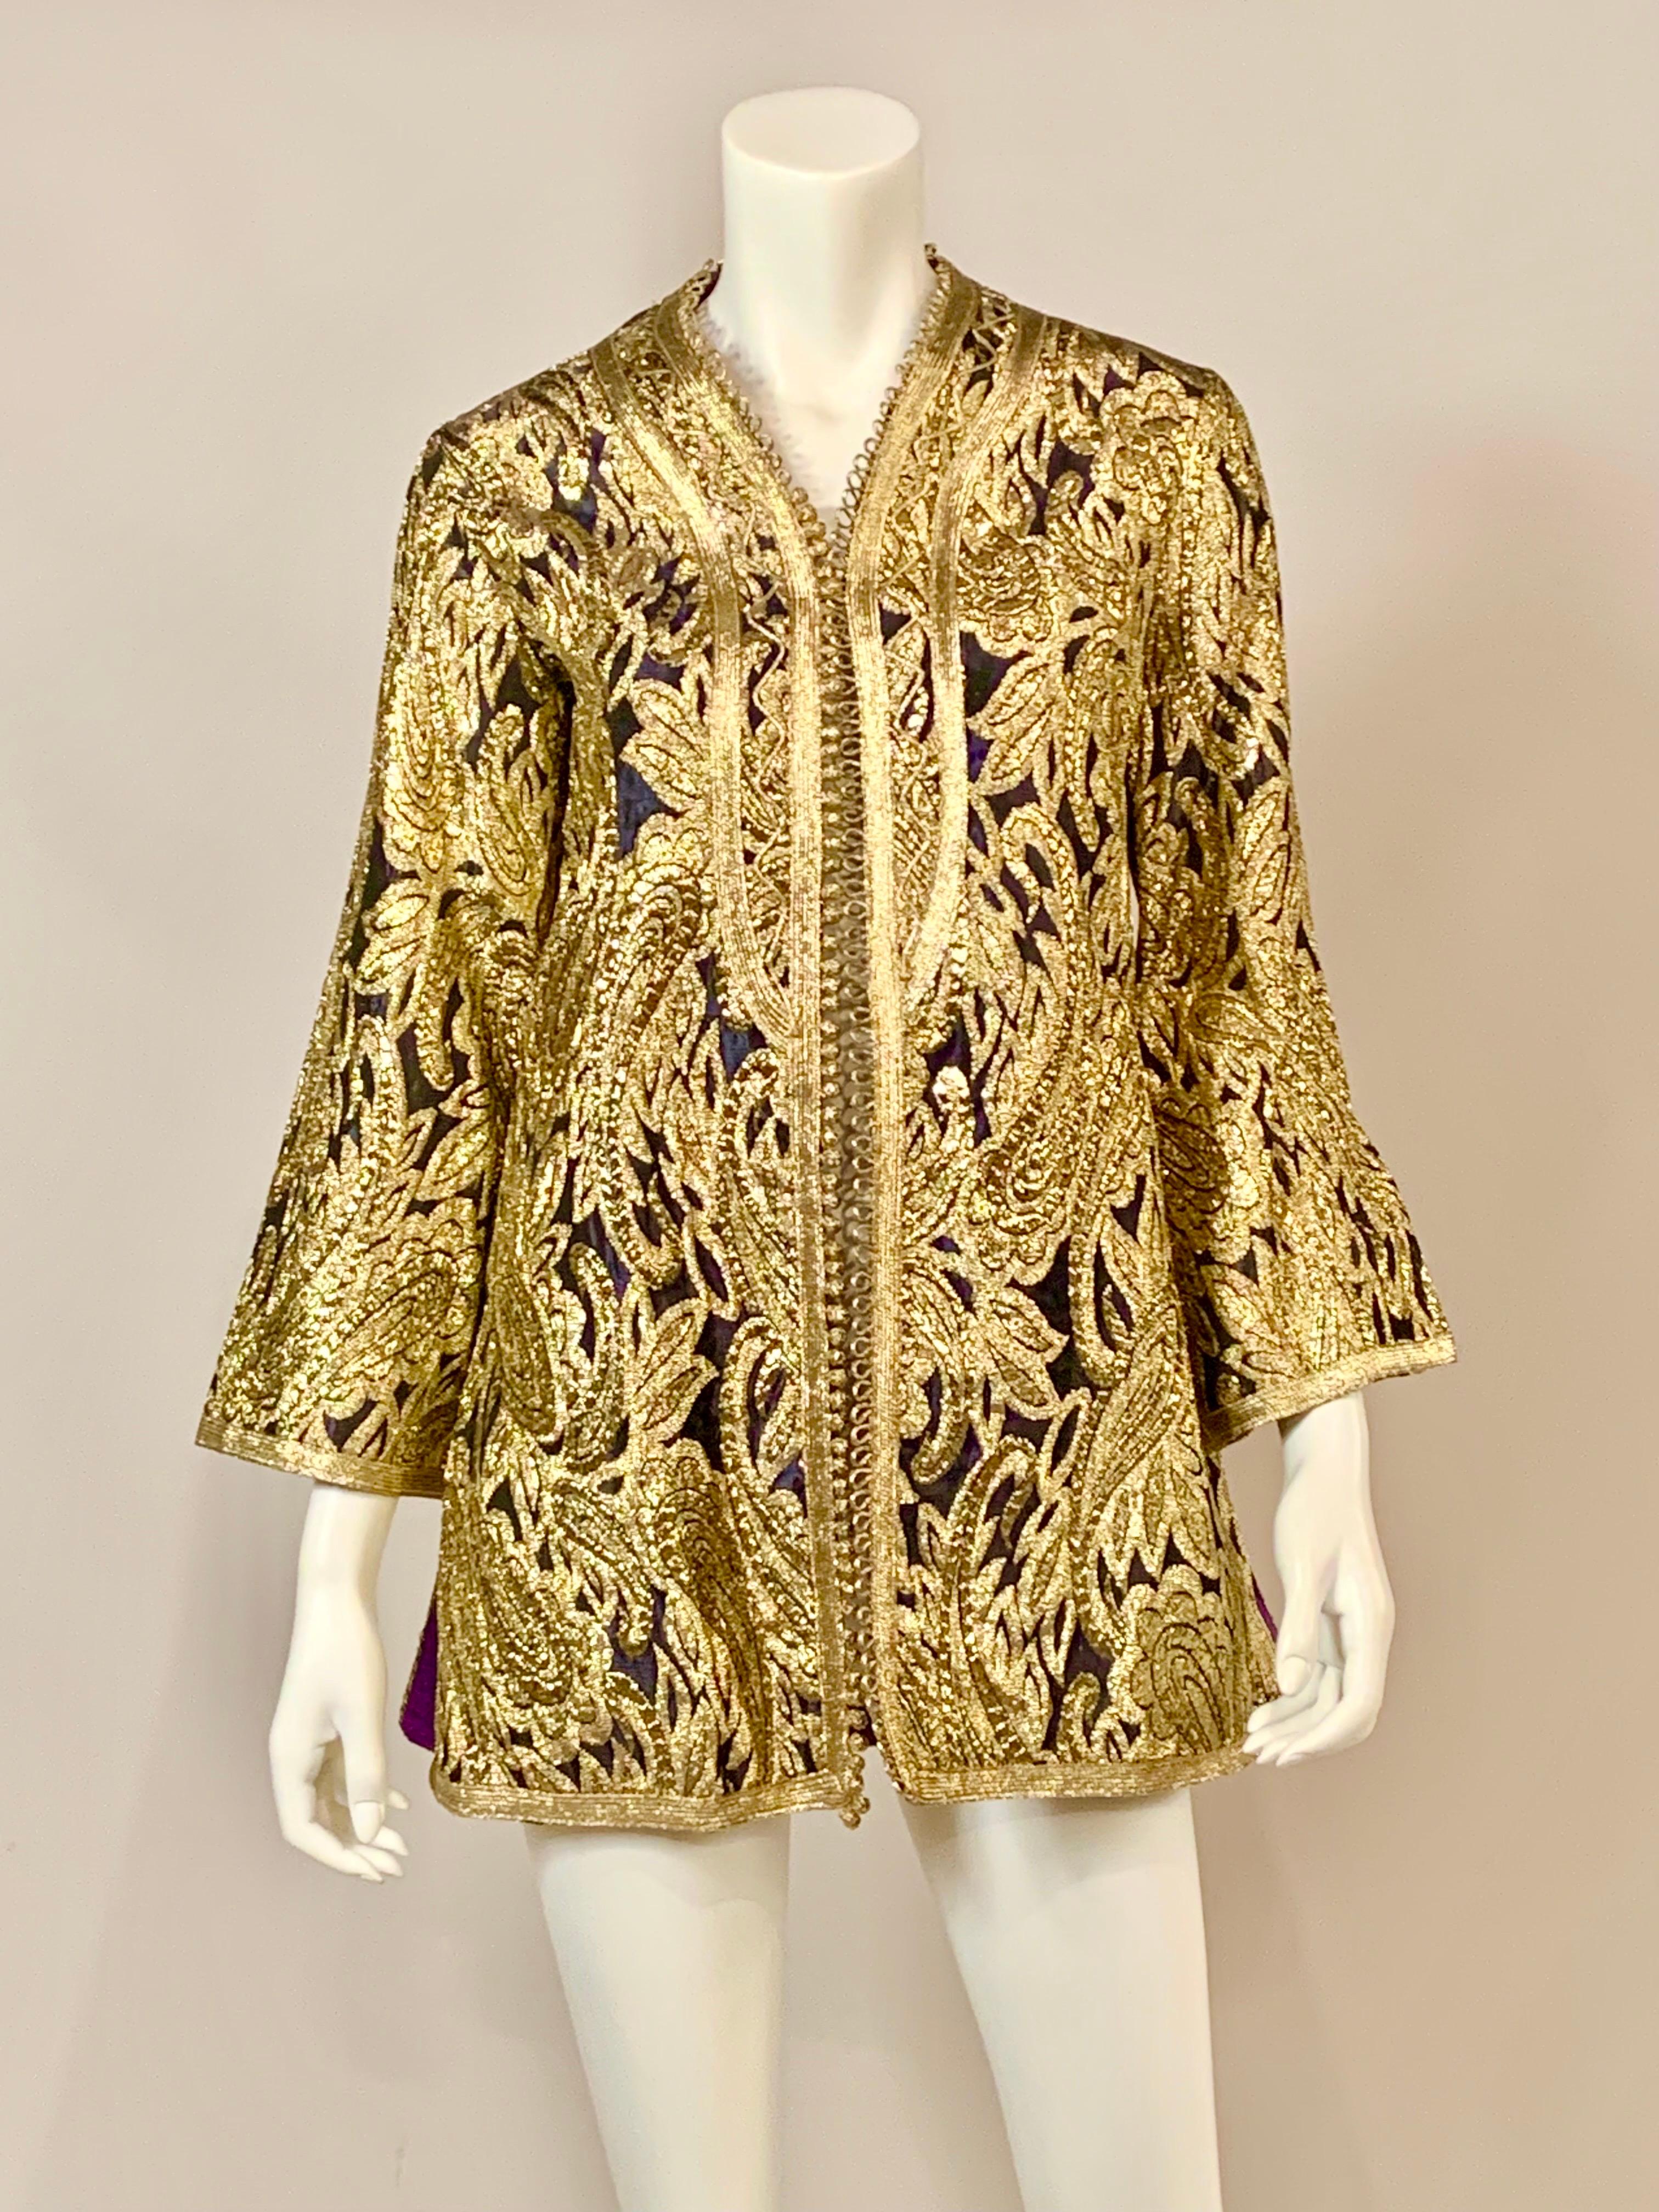 Made in Morocco exclusively for Paraphernalia in the 1970's this jacket is stunning. A deep purple, almost black background is woven with bright gold designs.  There are gold buttons and loops at the center front and on the side openings as well. 